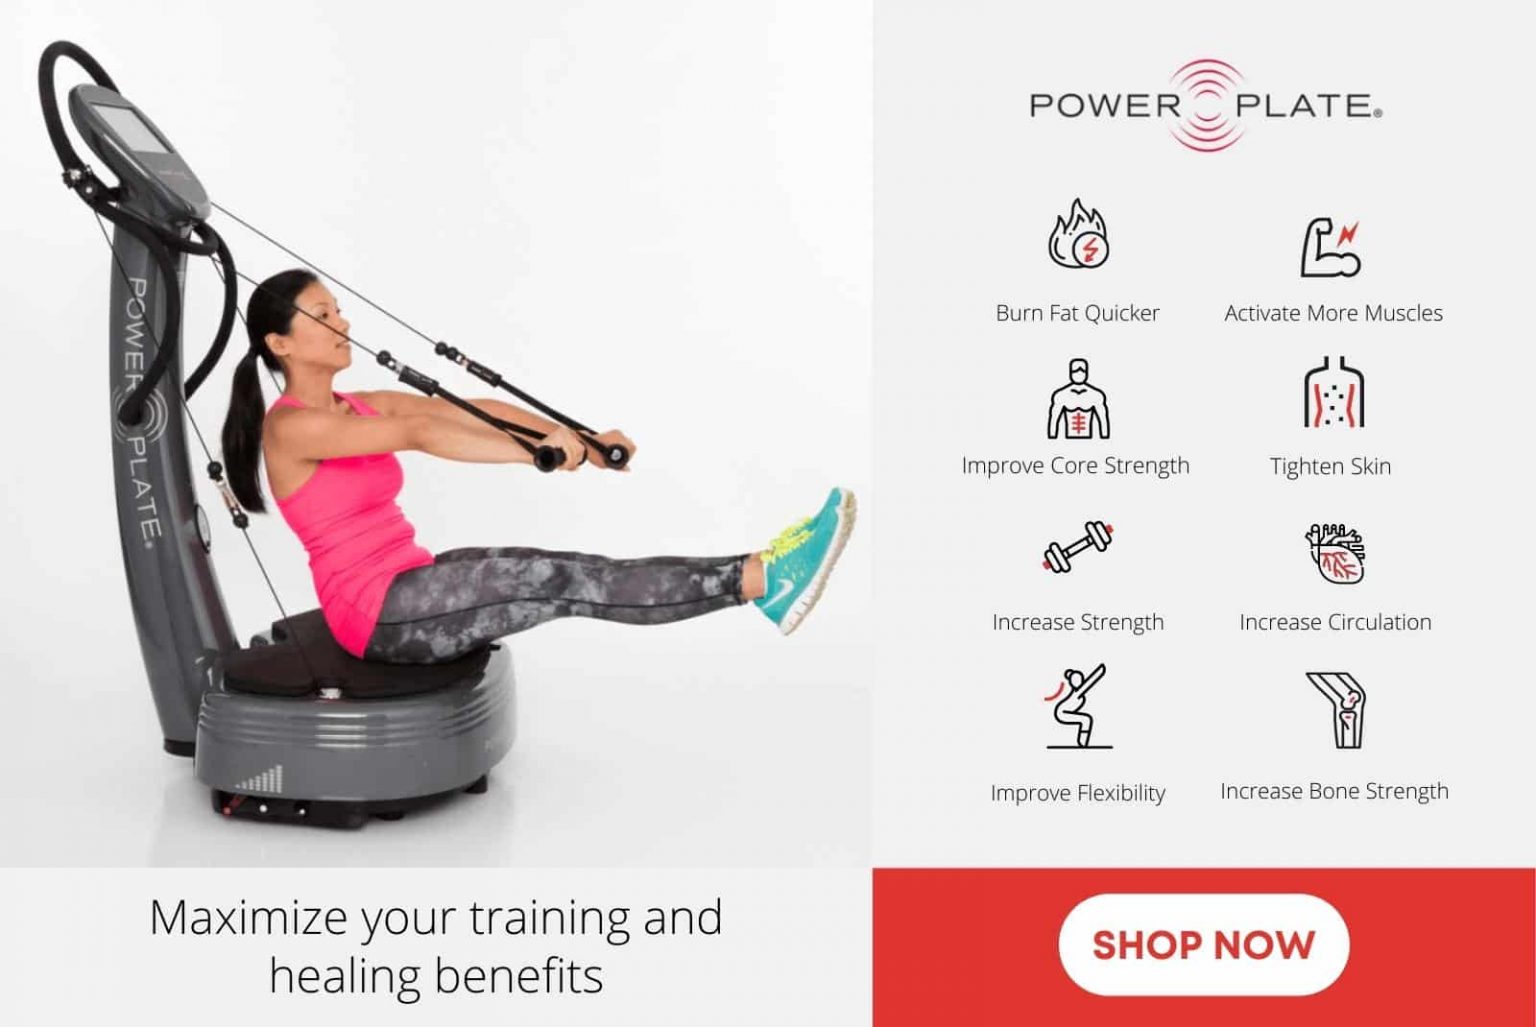 Maximize your training and health benefits with the Power Plate My7